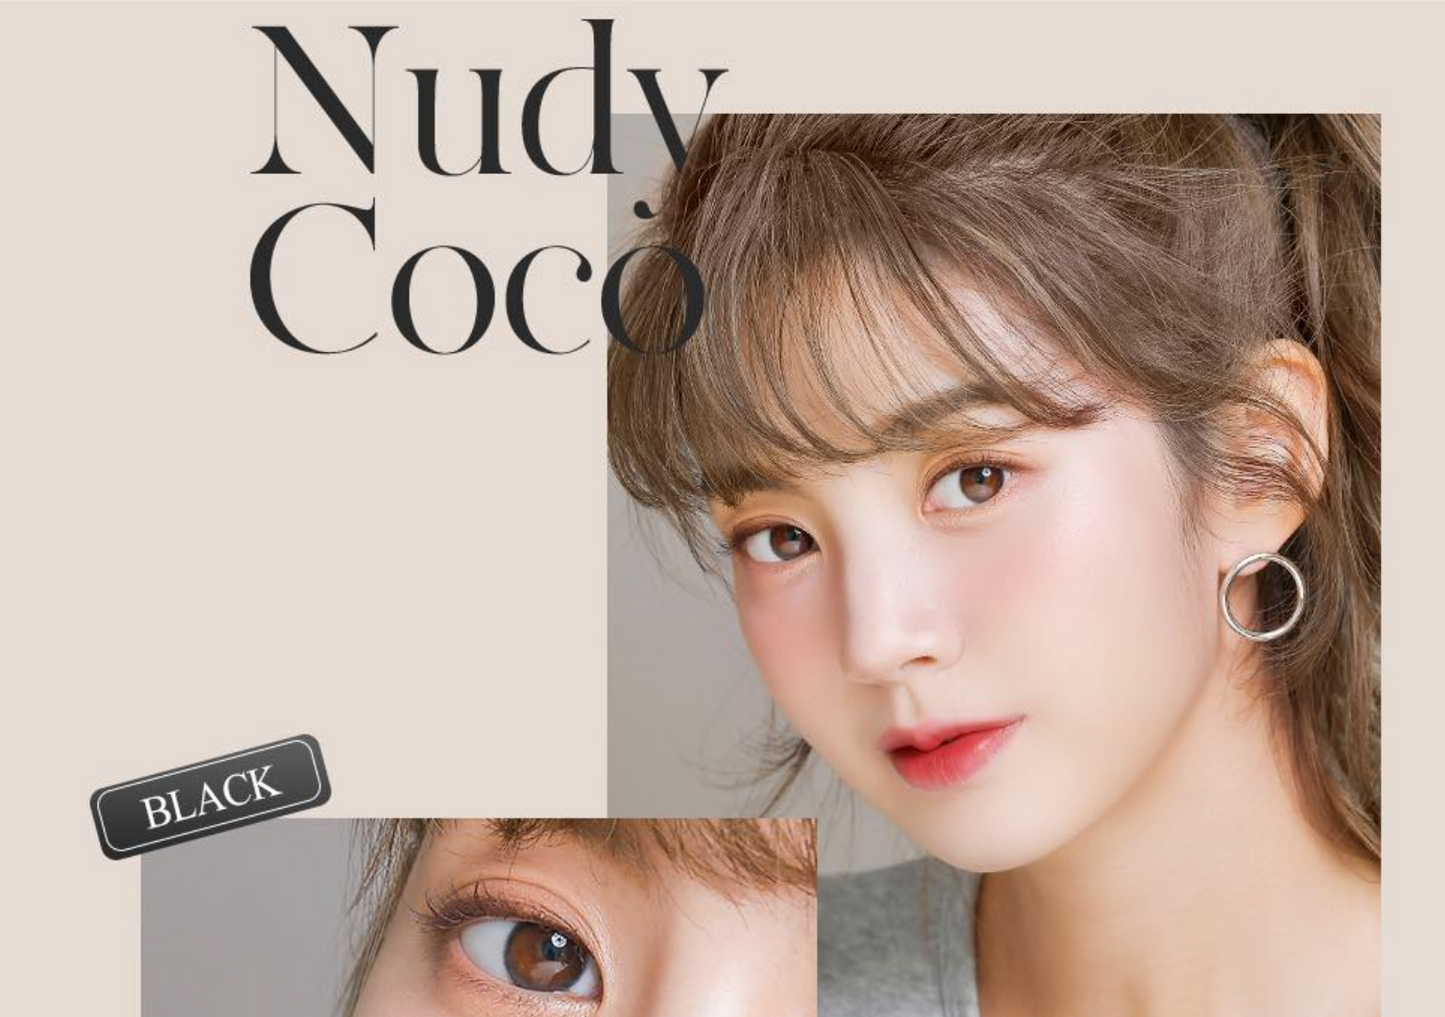 [Order Price] LENSTOWN NUDY COCO 1DAY - BLACK Daily Disposable/10 Tablets